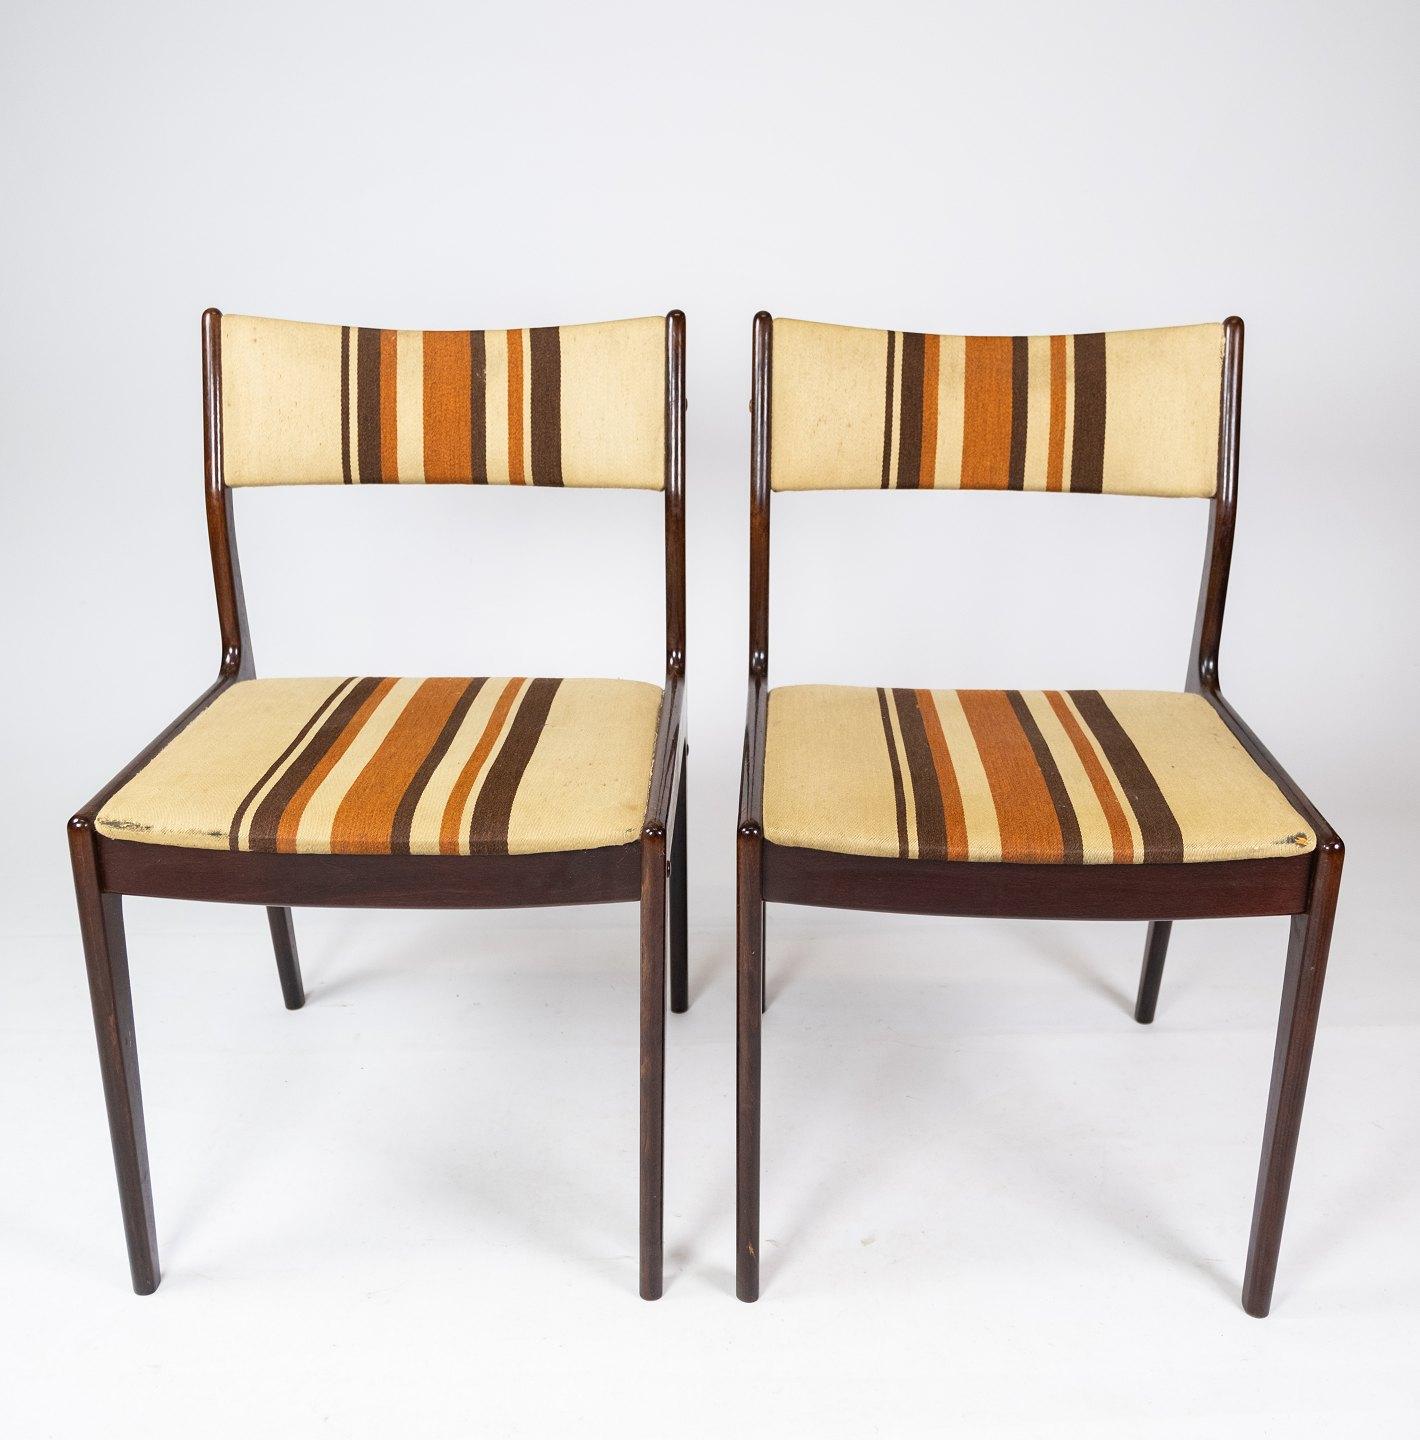 This pair of chairs, originating from the esteemed Uldum Furniture factory in Denmark, epitomizes the iconic Danish design ethos of the 1960s. Crafted from dark wood and upholstered with light striped fabric, these chairs showcase a harmonious blend